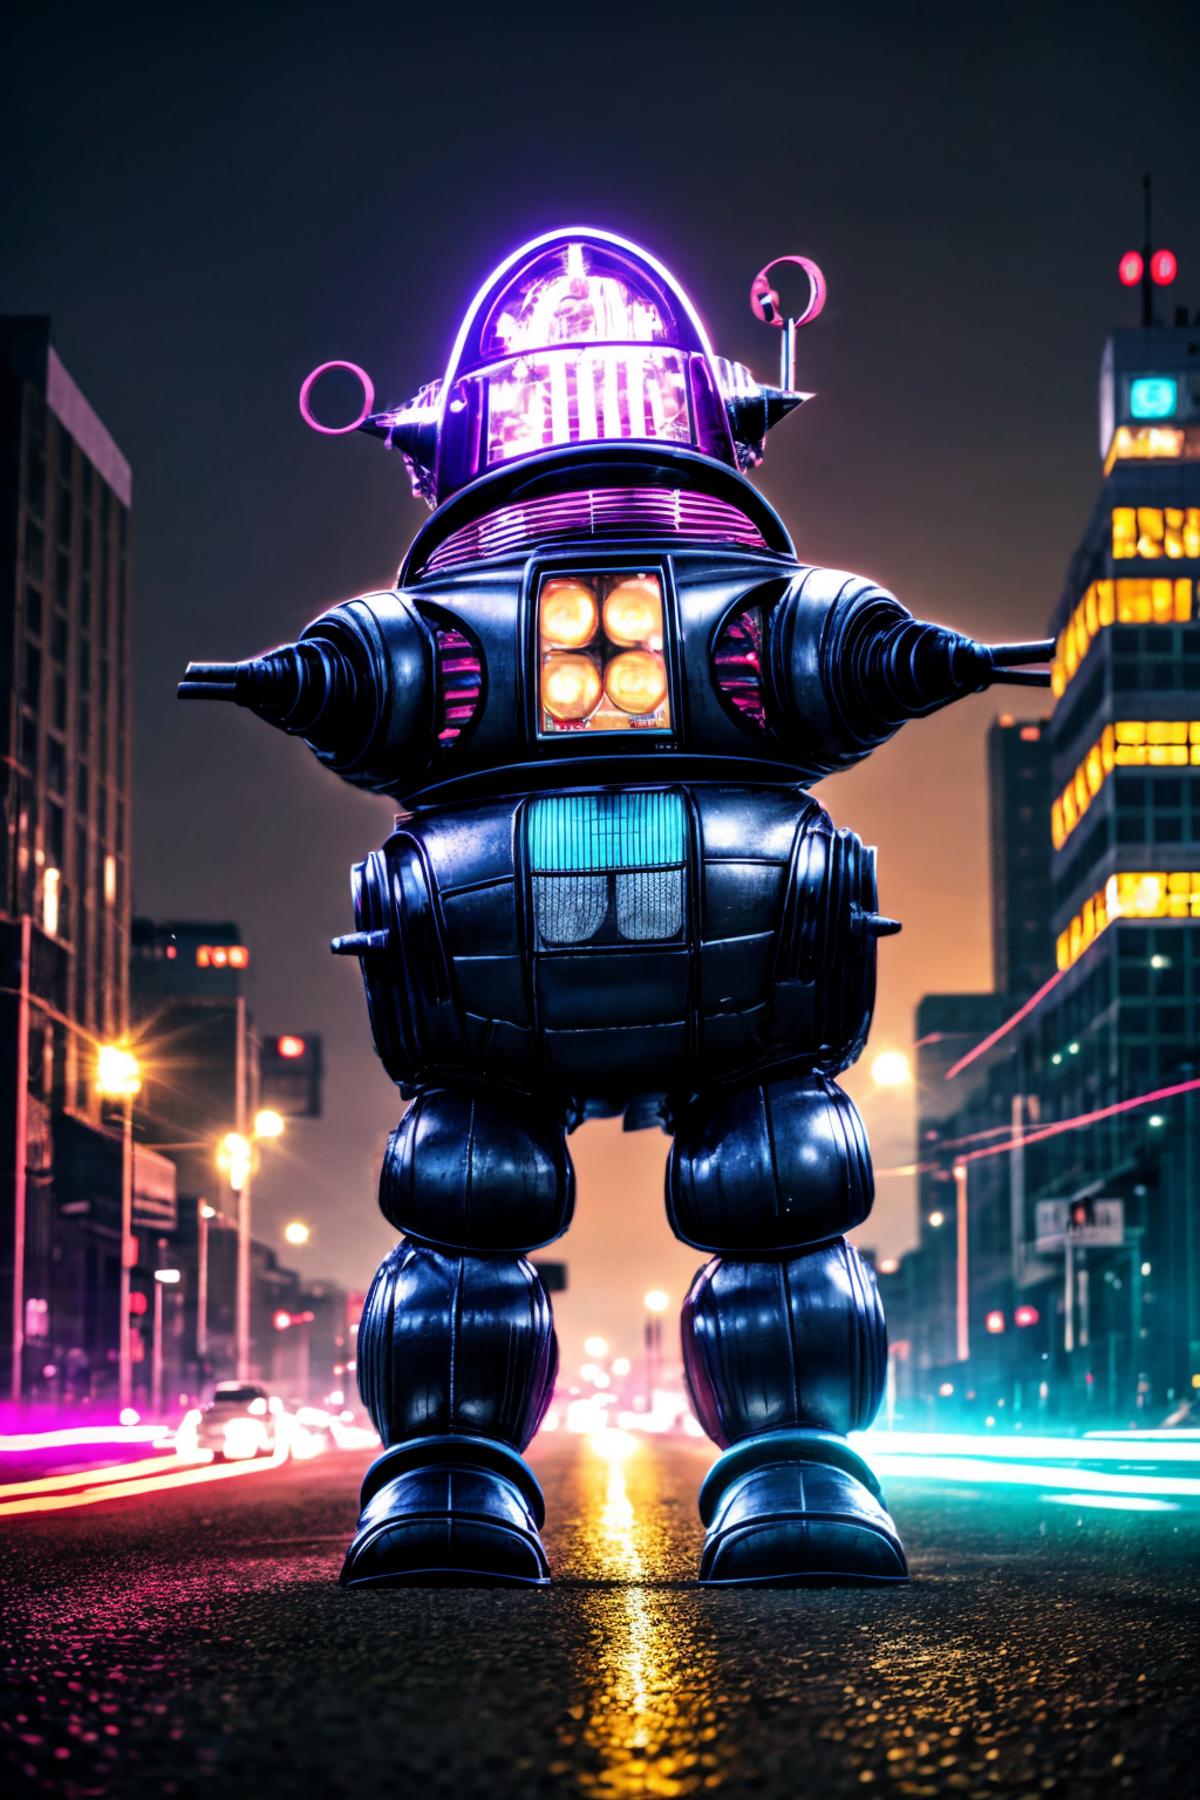 Robby the Robot image by NotASandwhich